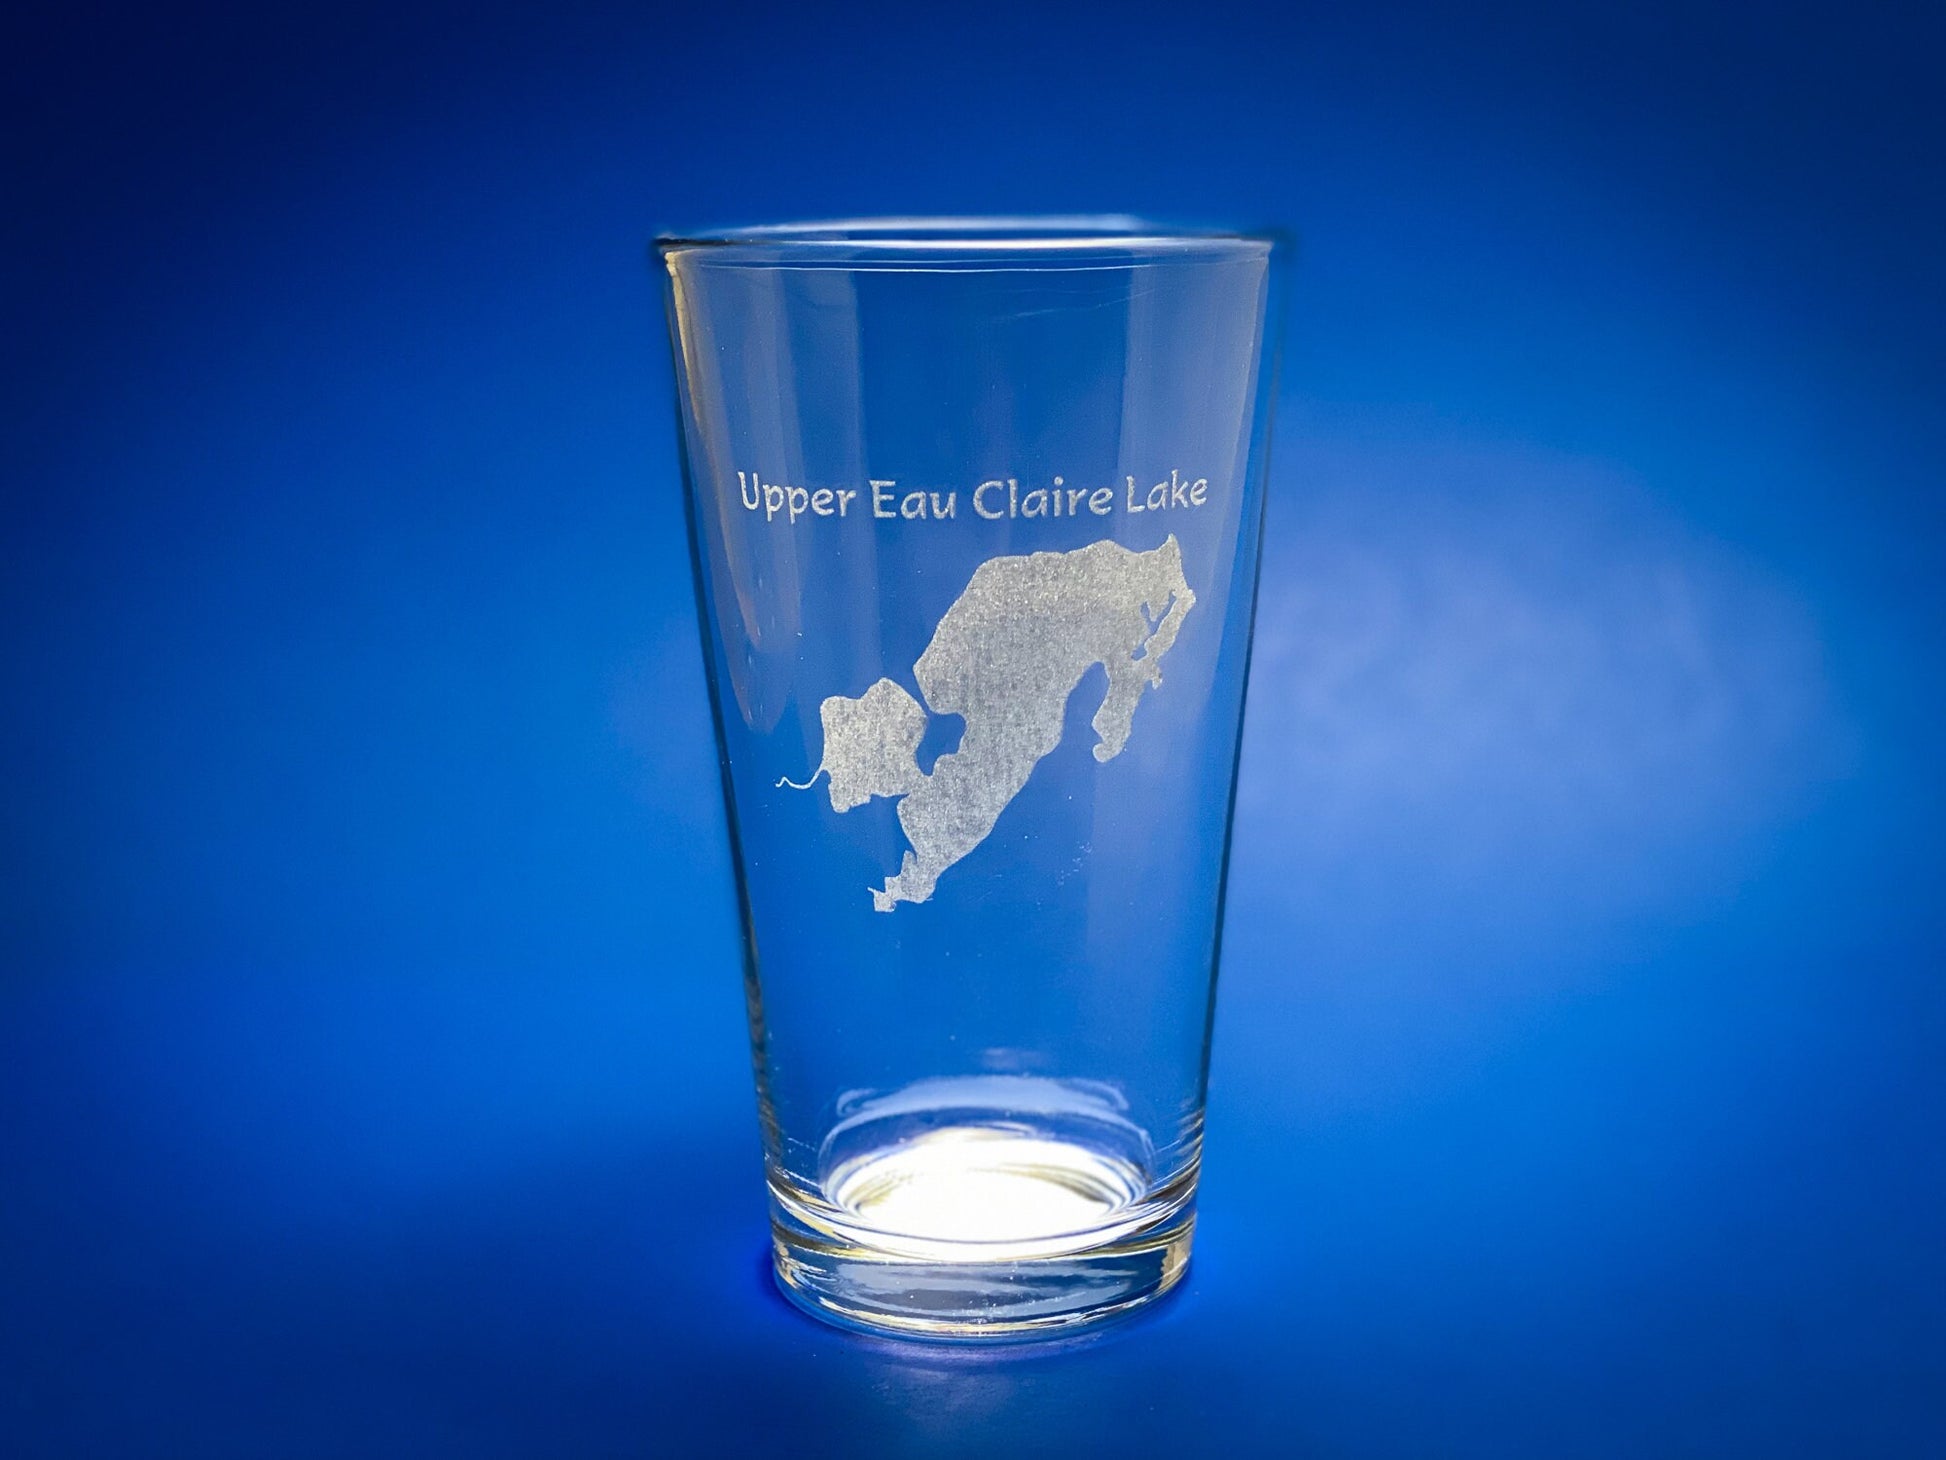 Upper Eau Claire Lake - Wisconsin - Laser engraved pint glass